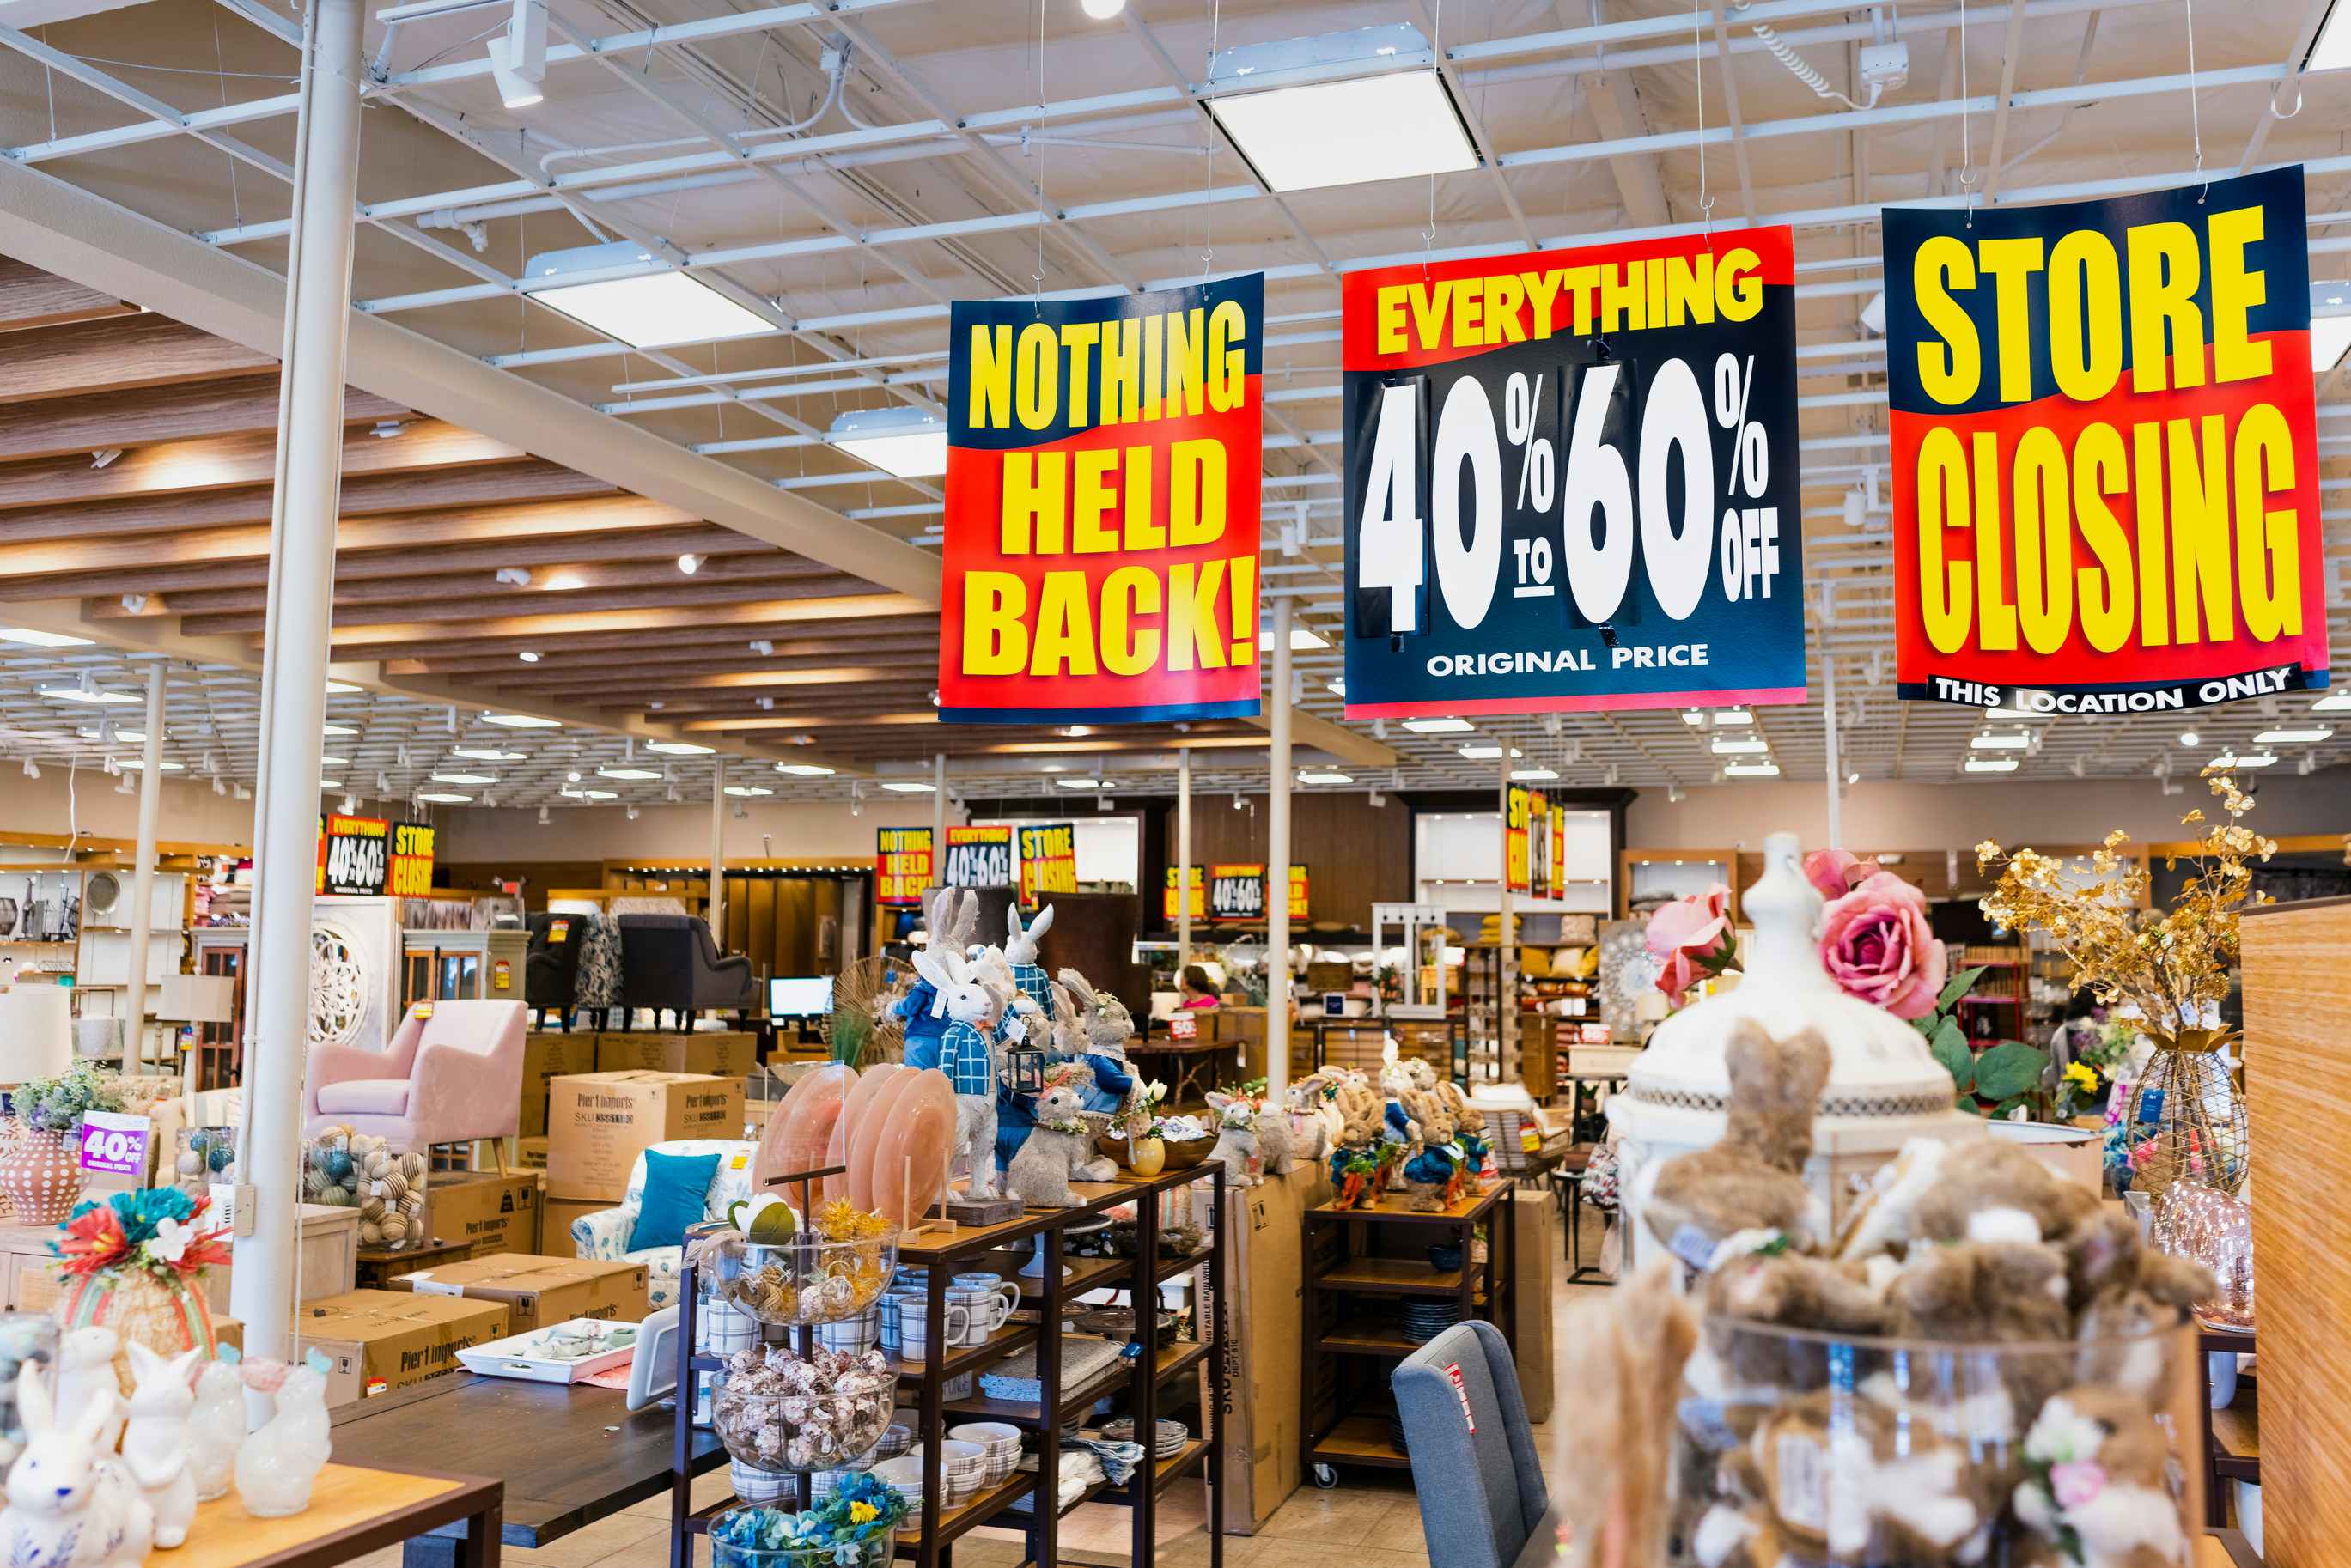 pier 1 liquidation closeout sale inside of the store